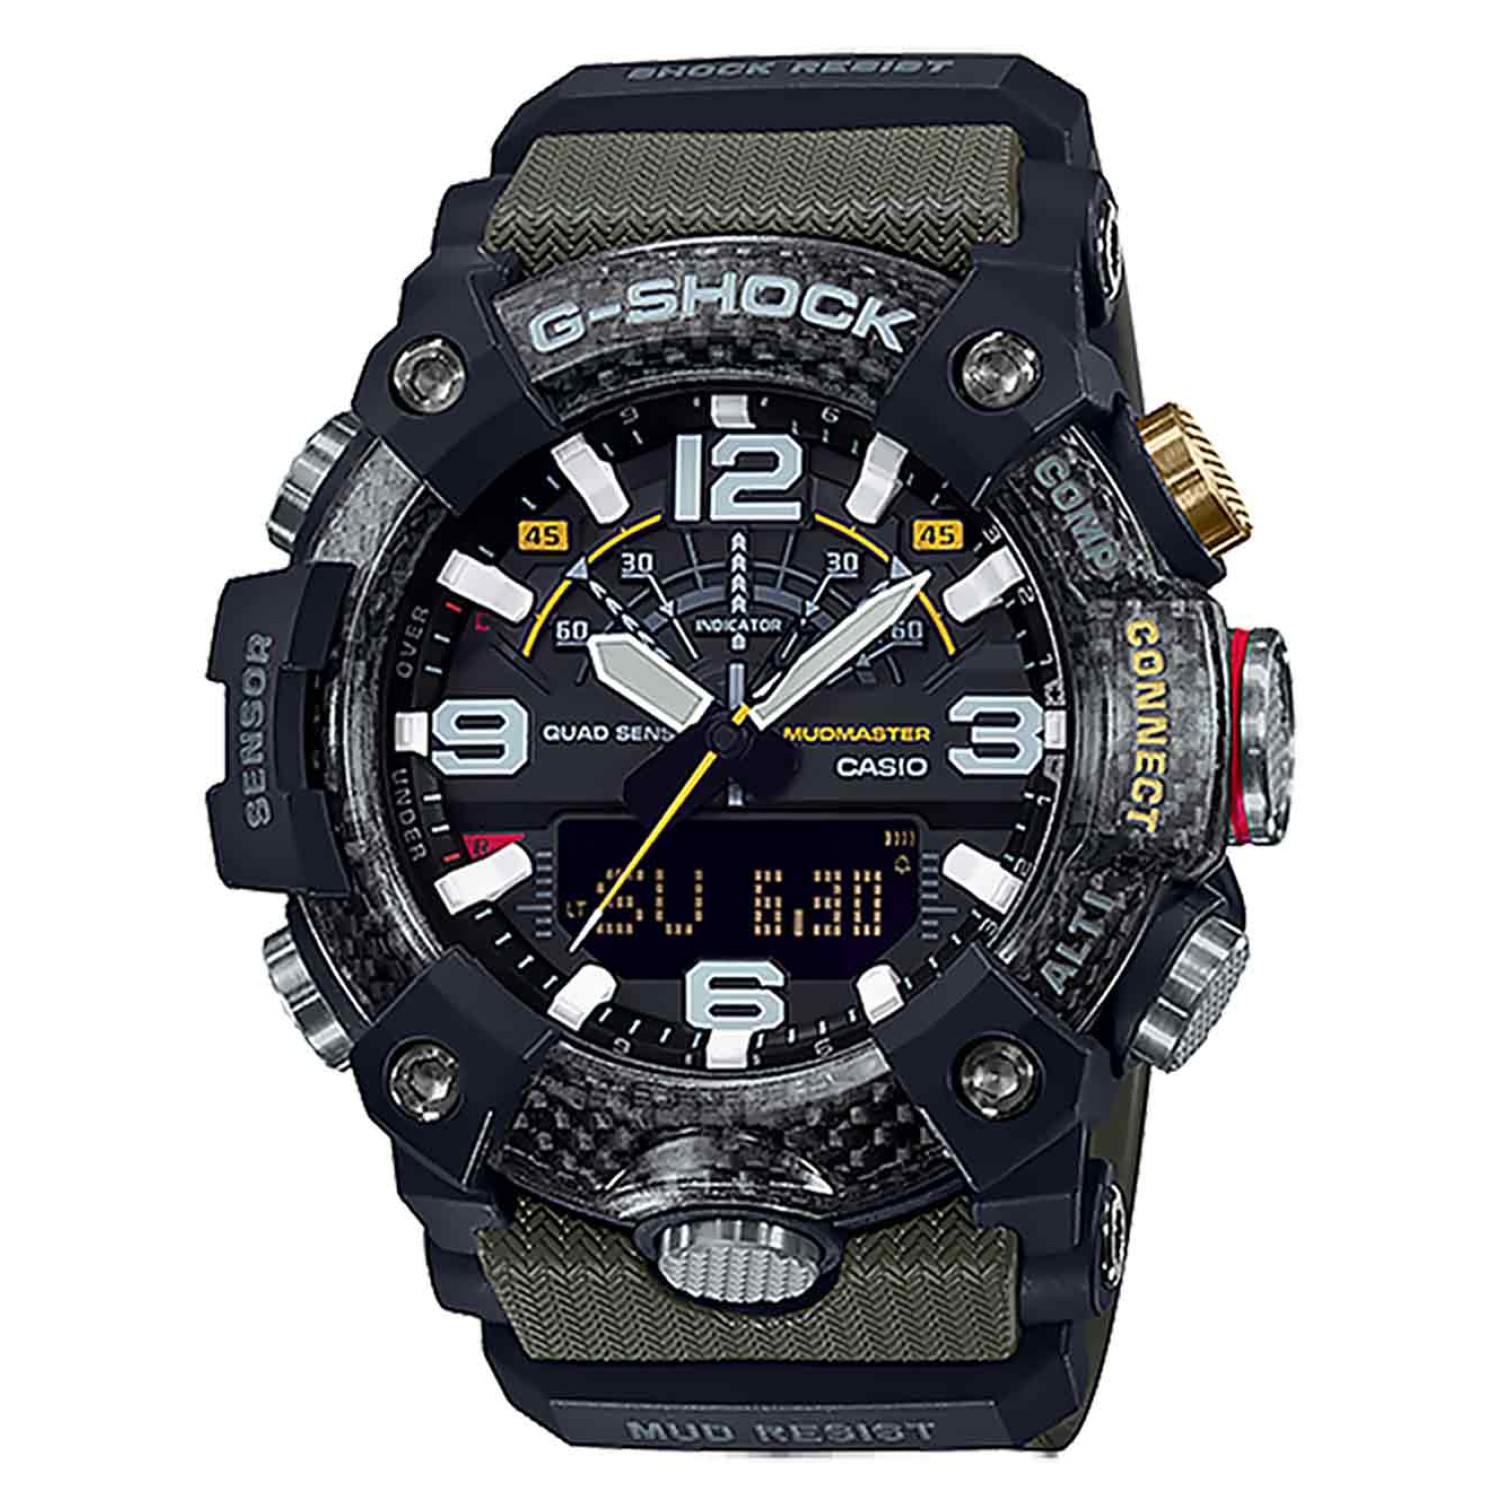 GGB100-1A3 G-SHOCK Mudmaster Master of G Series. From the MASTER OF G Series MUDMASTER, the watch that is designed and engineered to withstand rough land environments, come carbon resin models that incorporate a new type of structure. The case is made of 